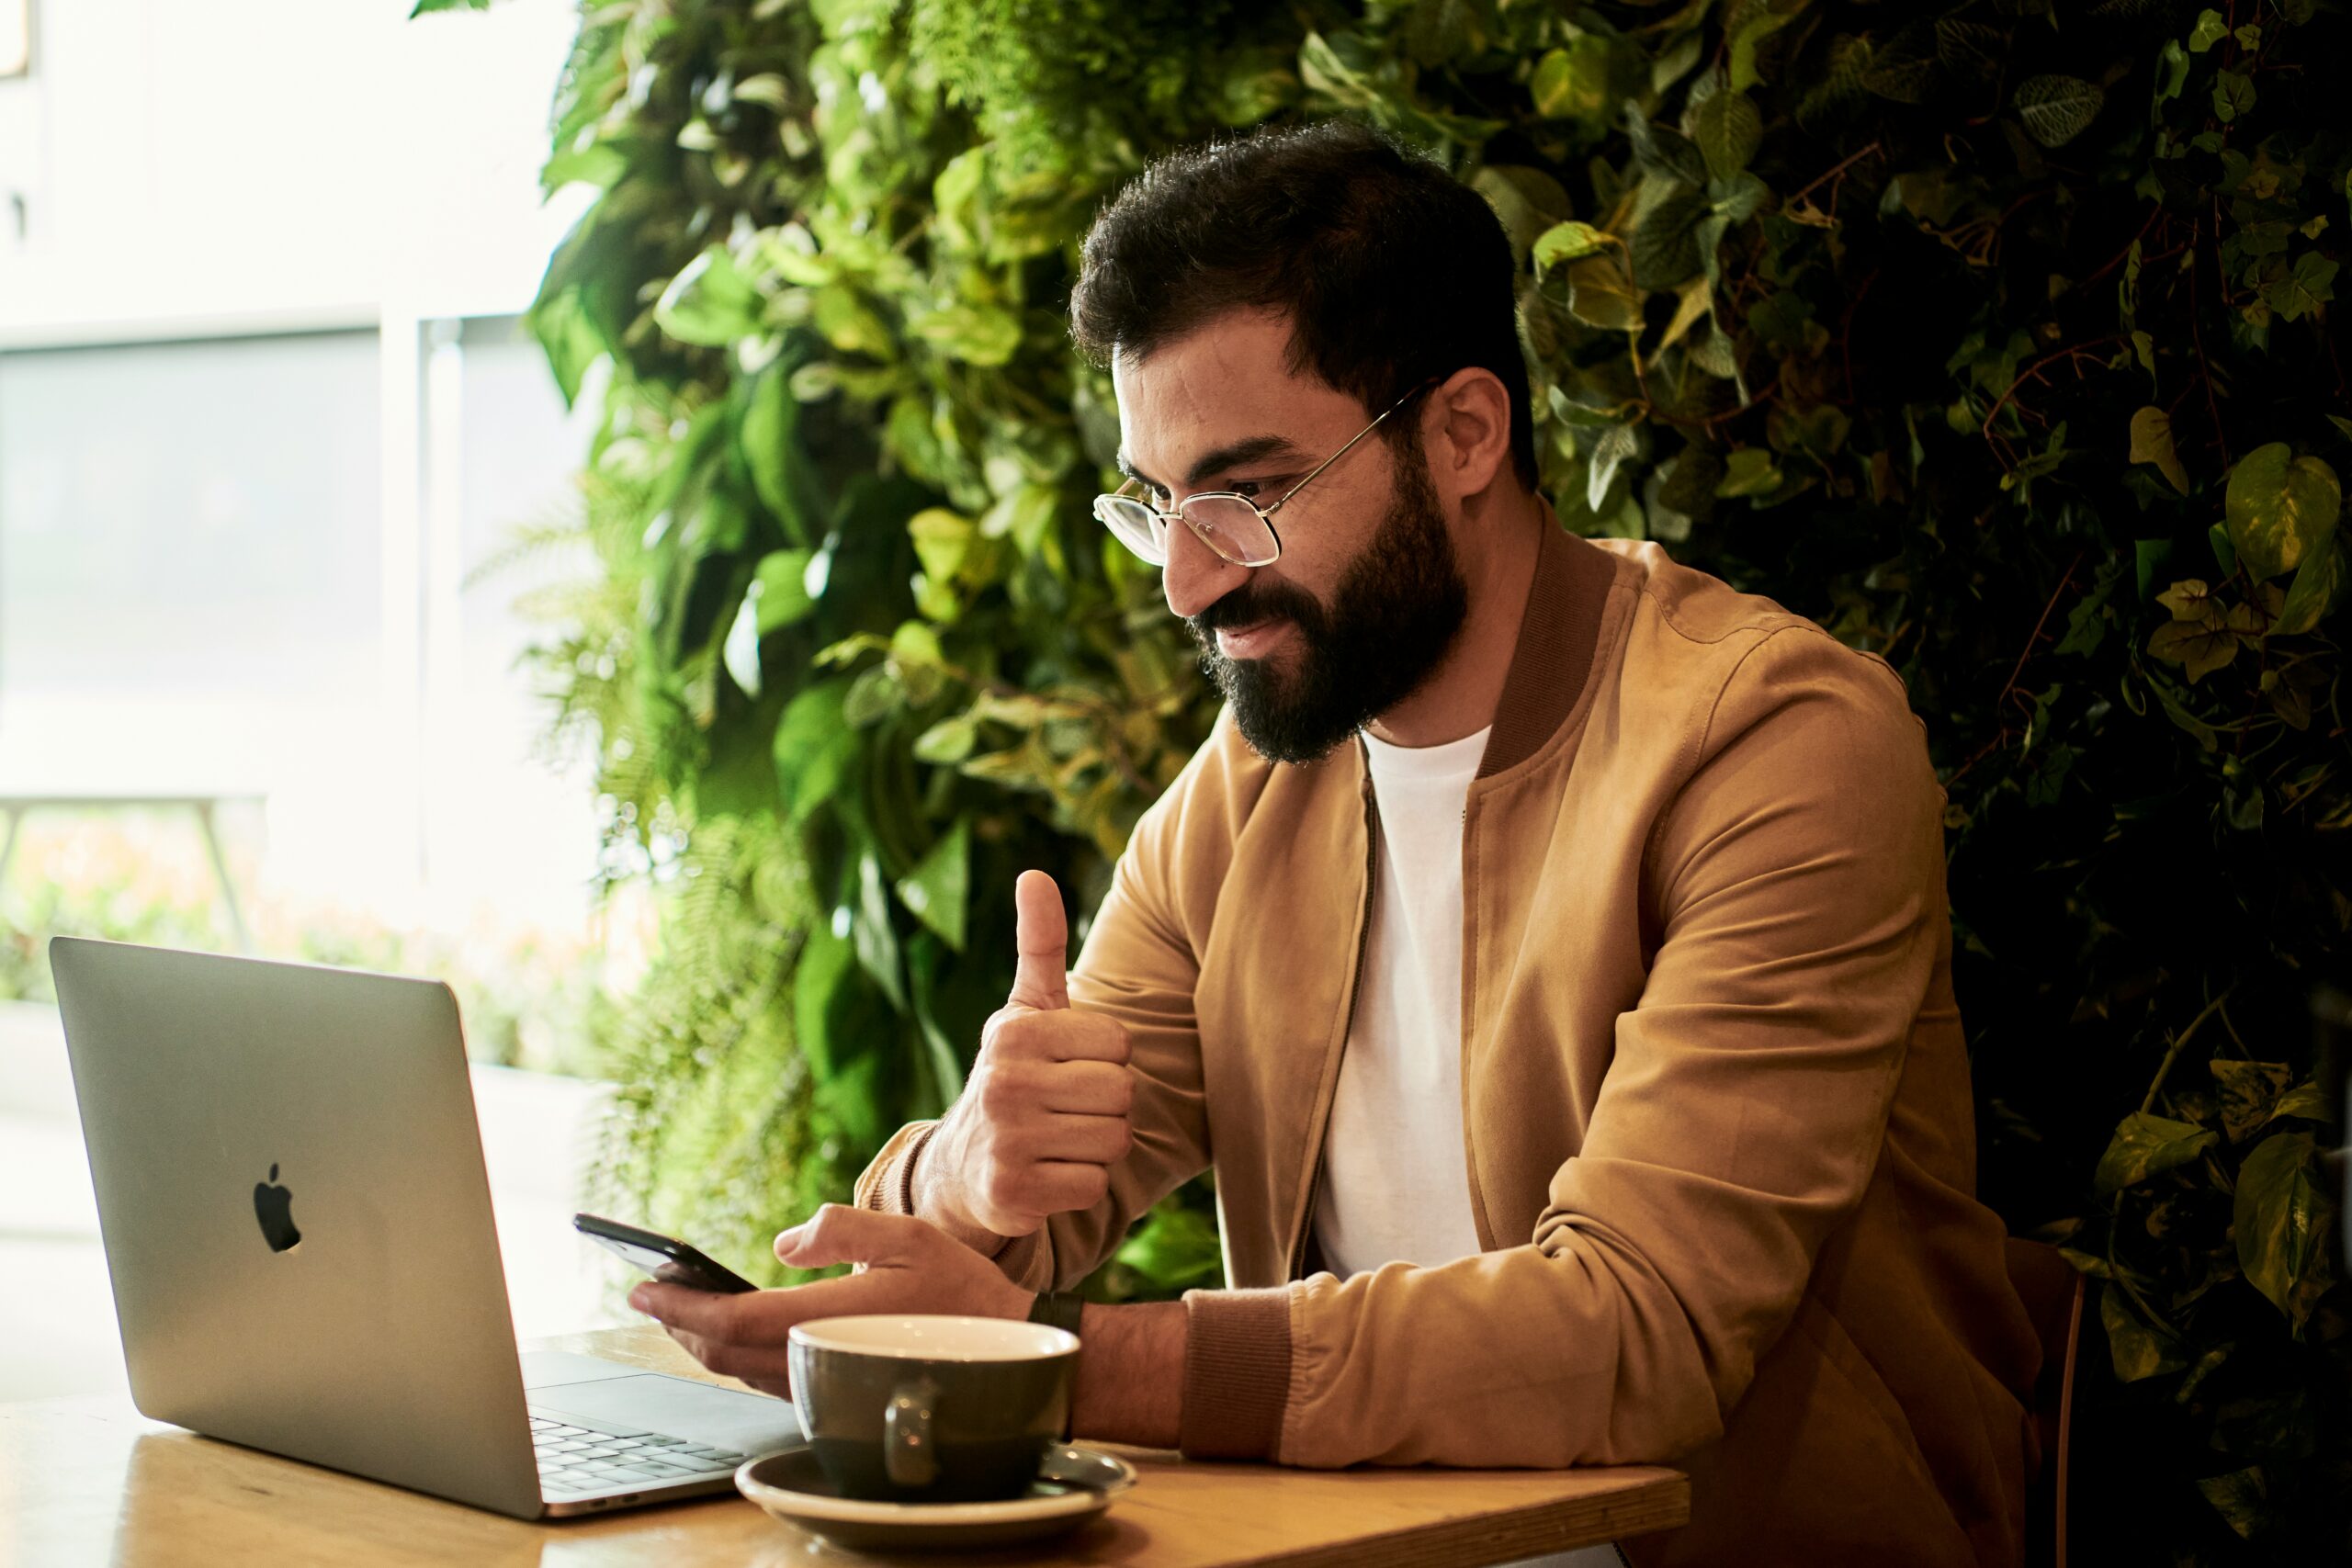 Man in glasses and a tan jacket using a laptop and smartphone at a cafe table, giving a thumbs up after virtual meeting on what is fully managed IT services.